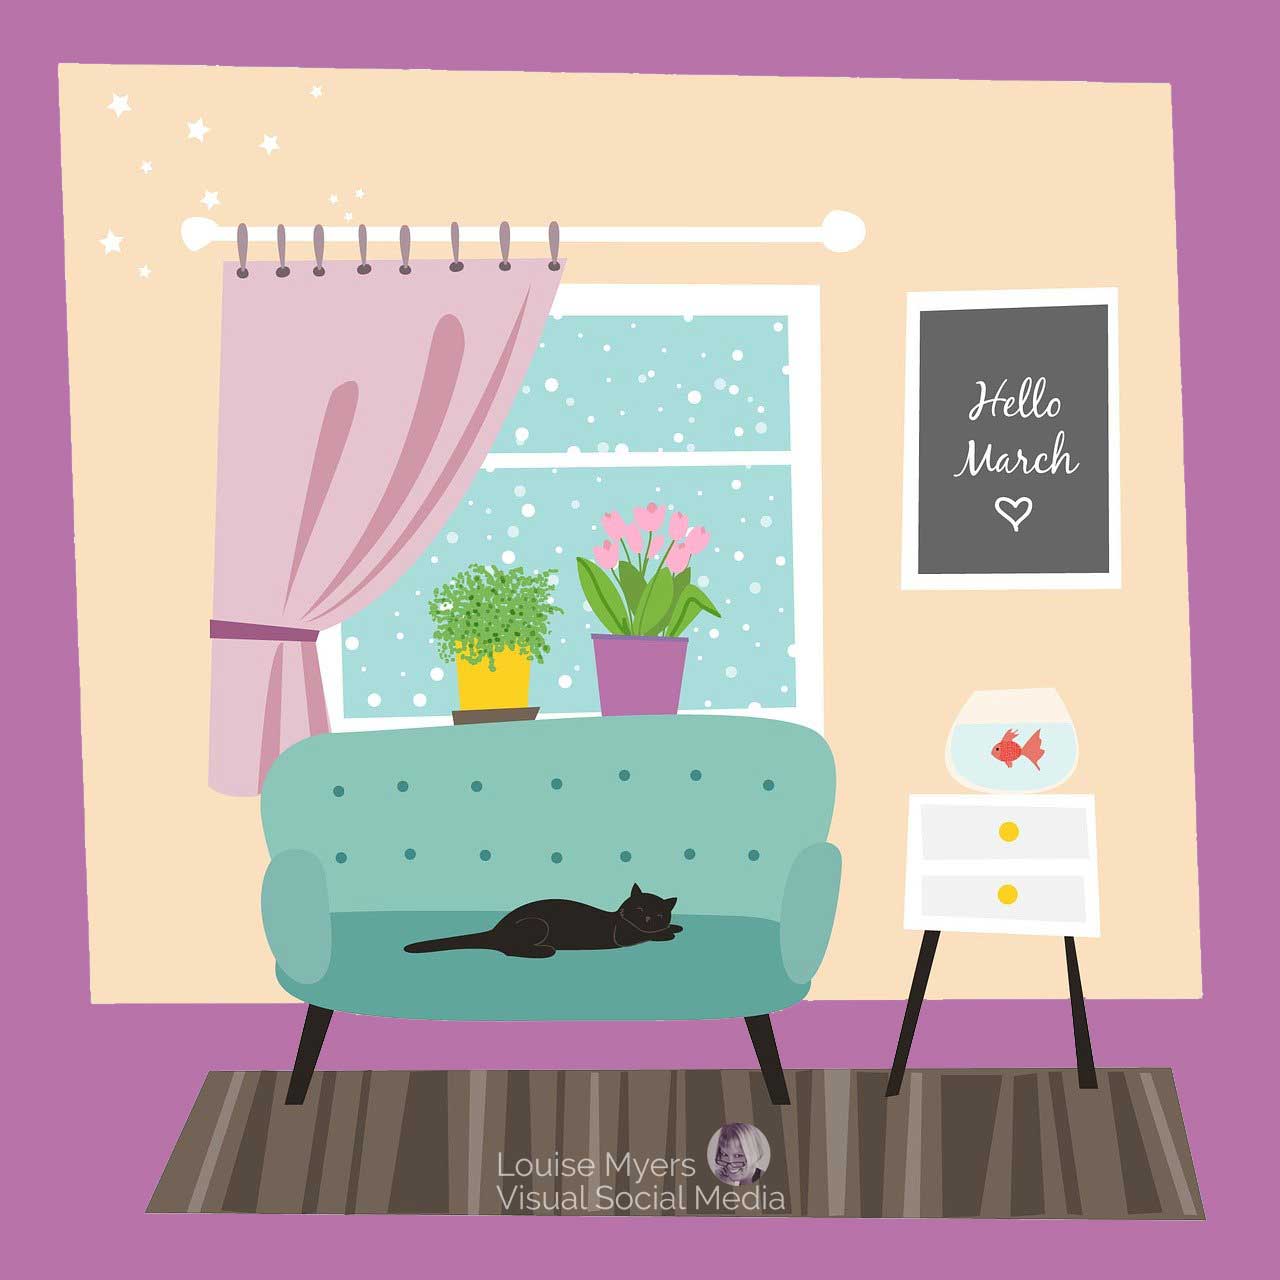 Hello March on chalkboard by cat sleeping on sofa with snow scene outside.